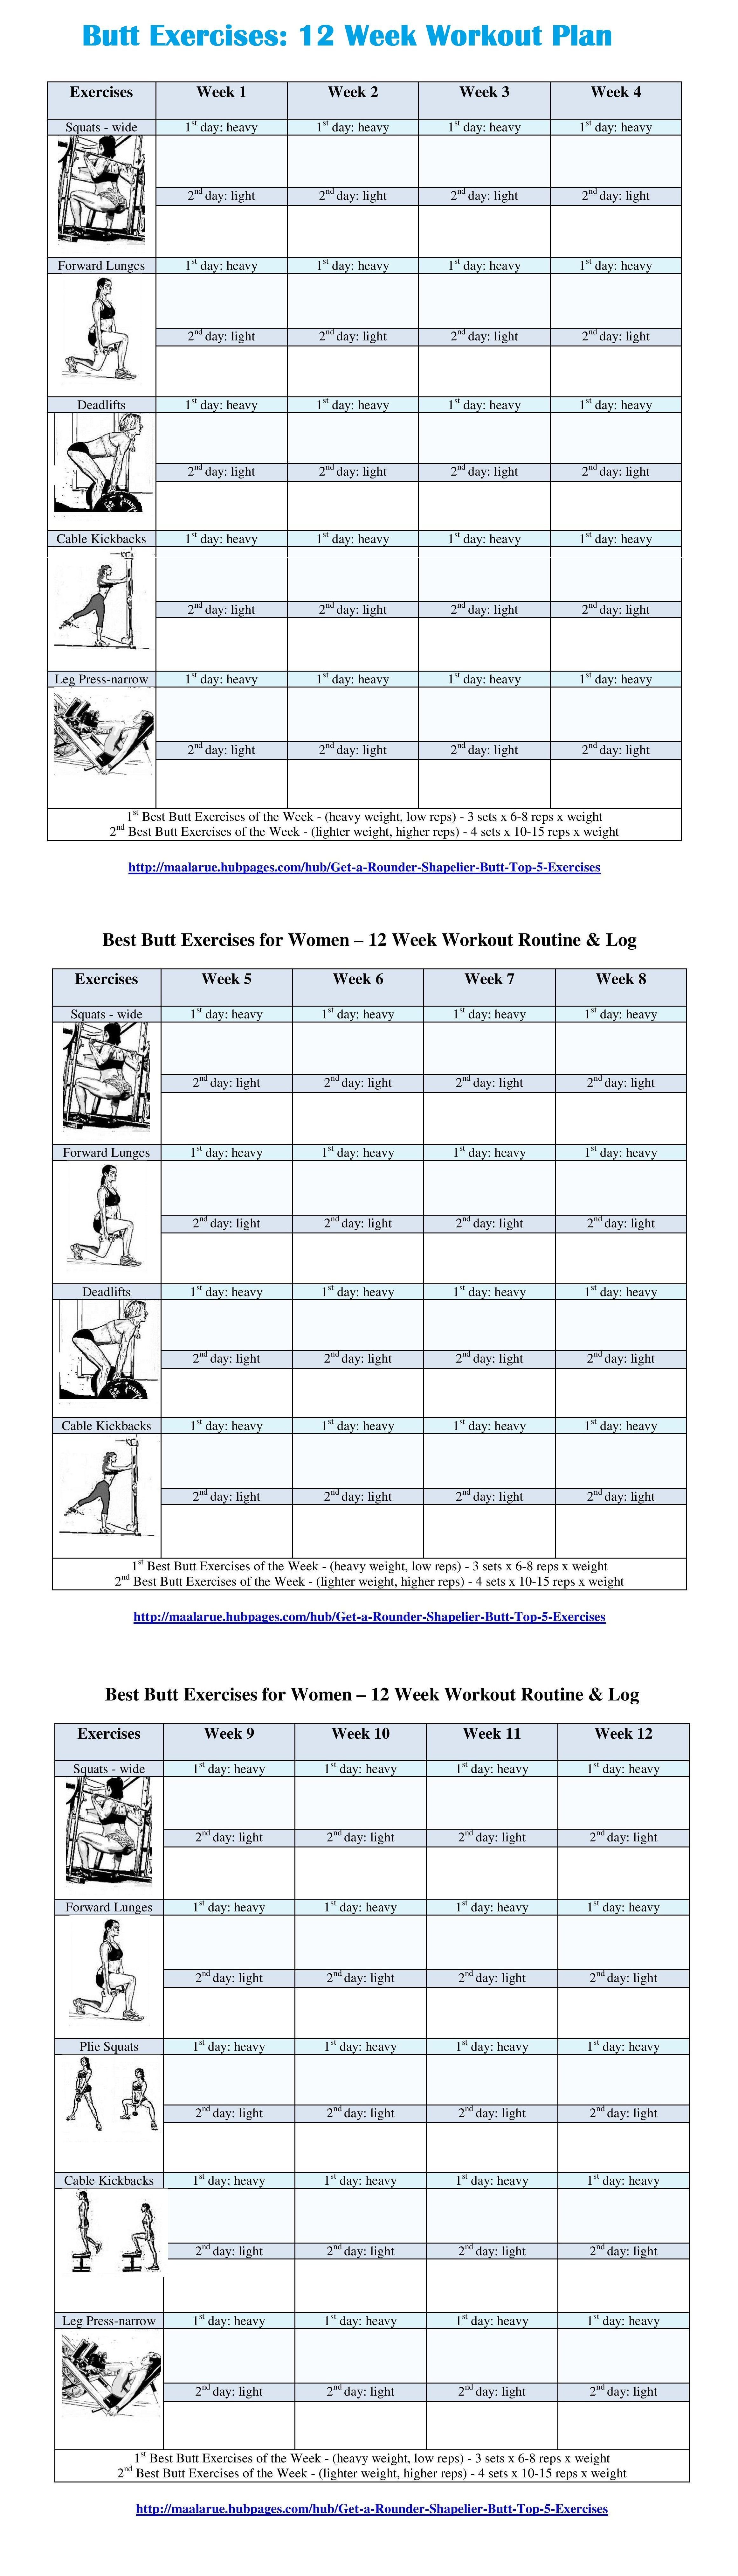 Best Butt Workouts For Women - Free Printable 12 Week Butt Workout Plan - Free Printable Gym Workout Routines